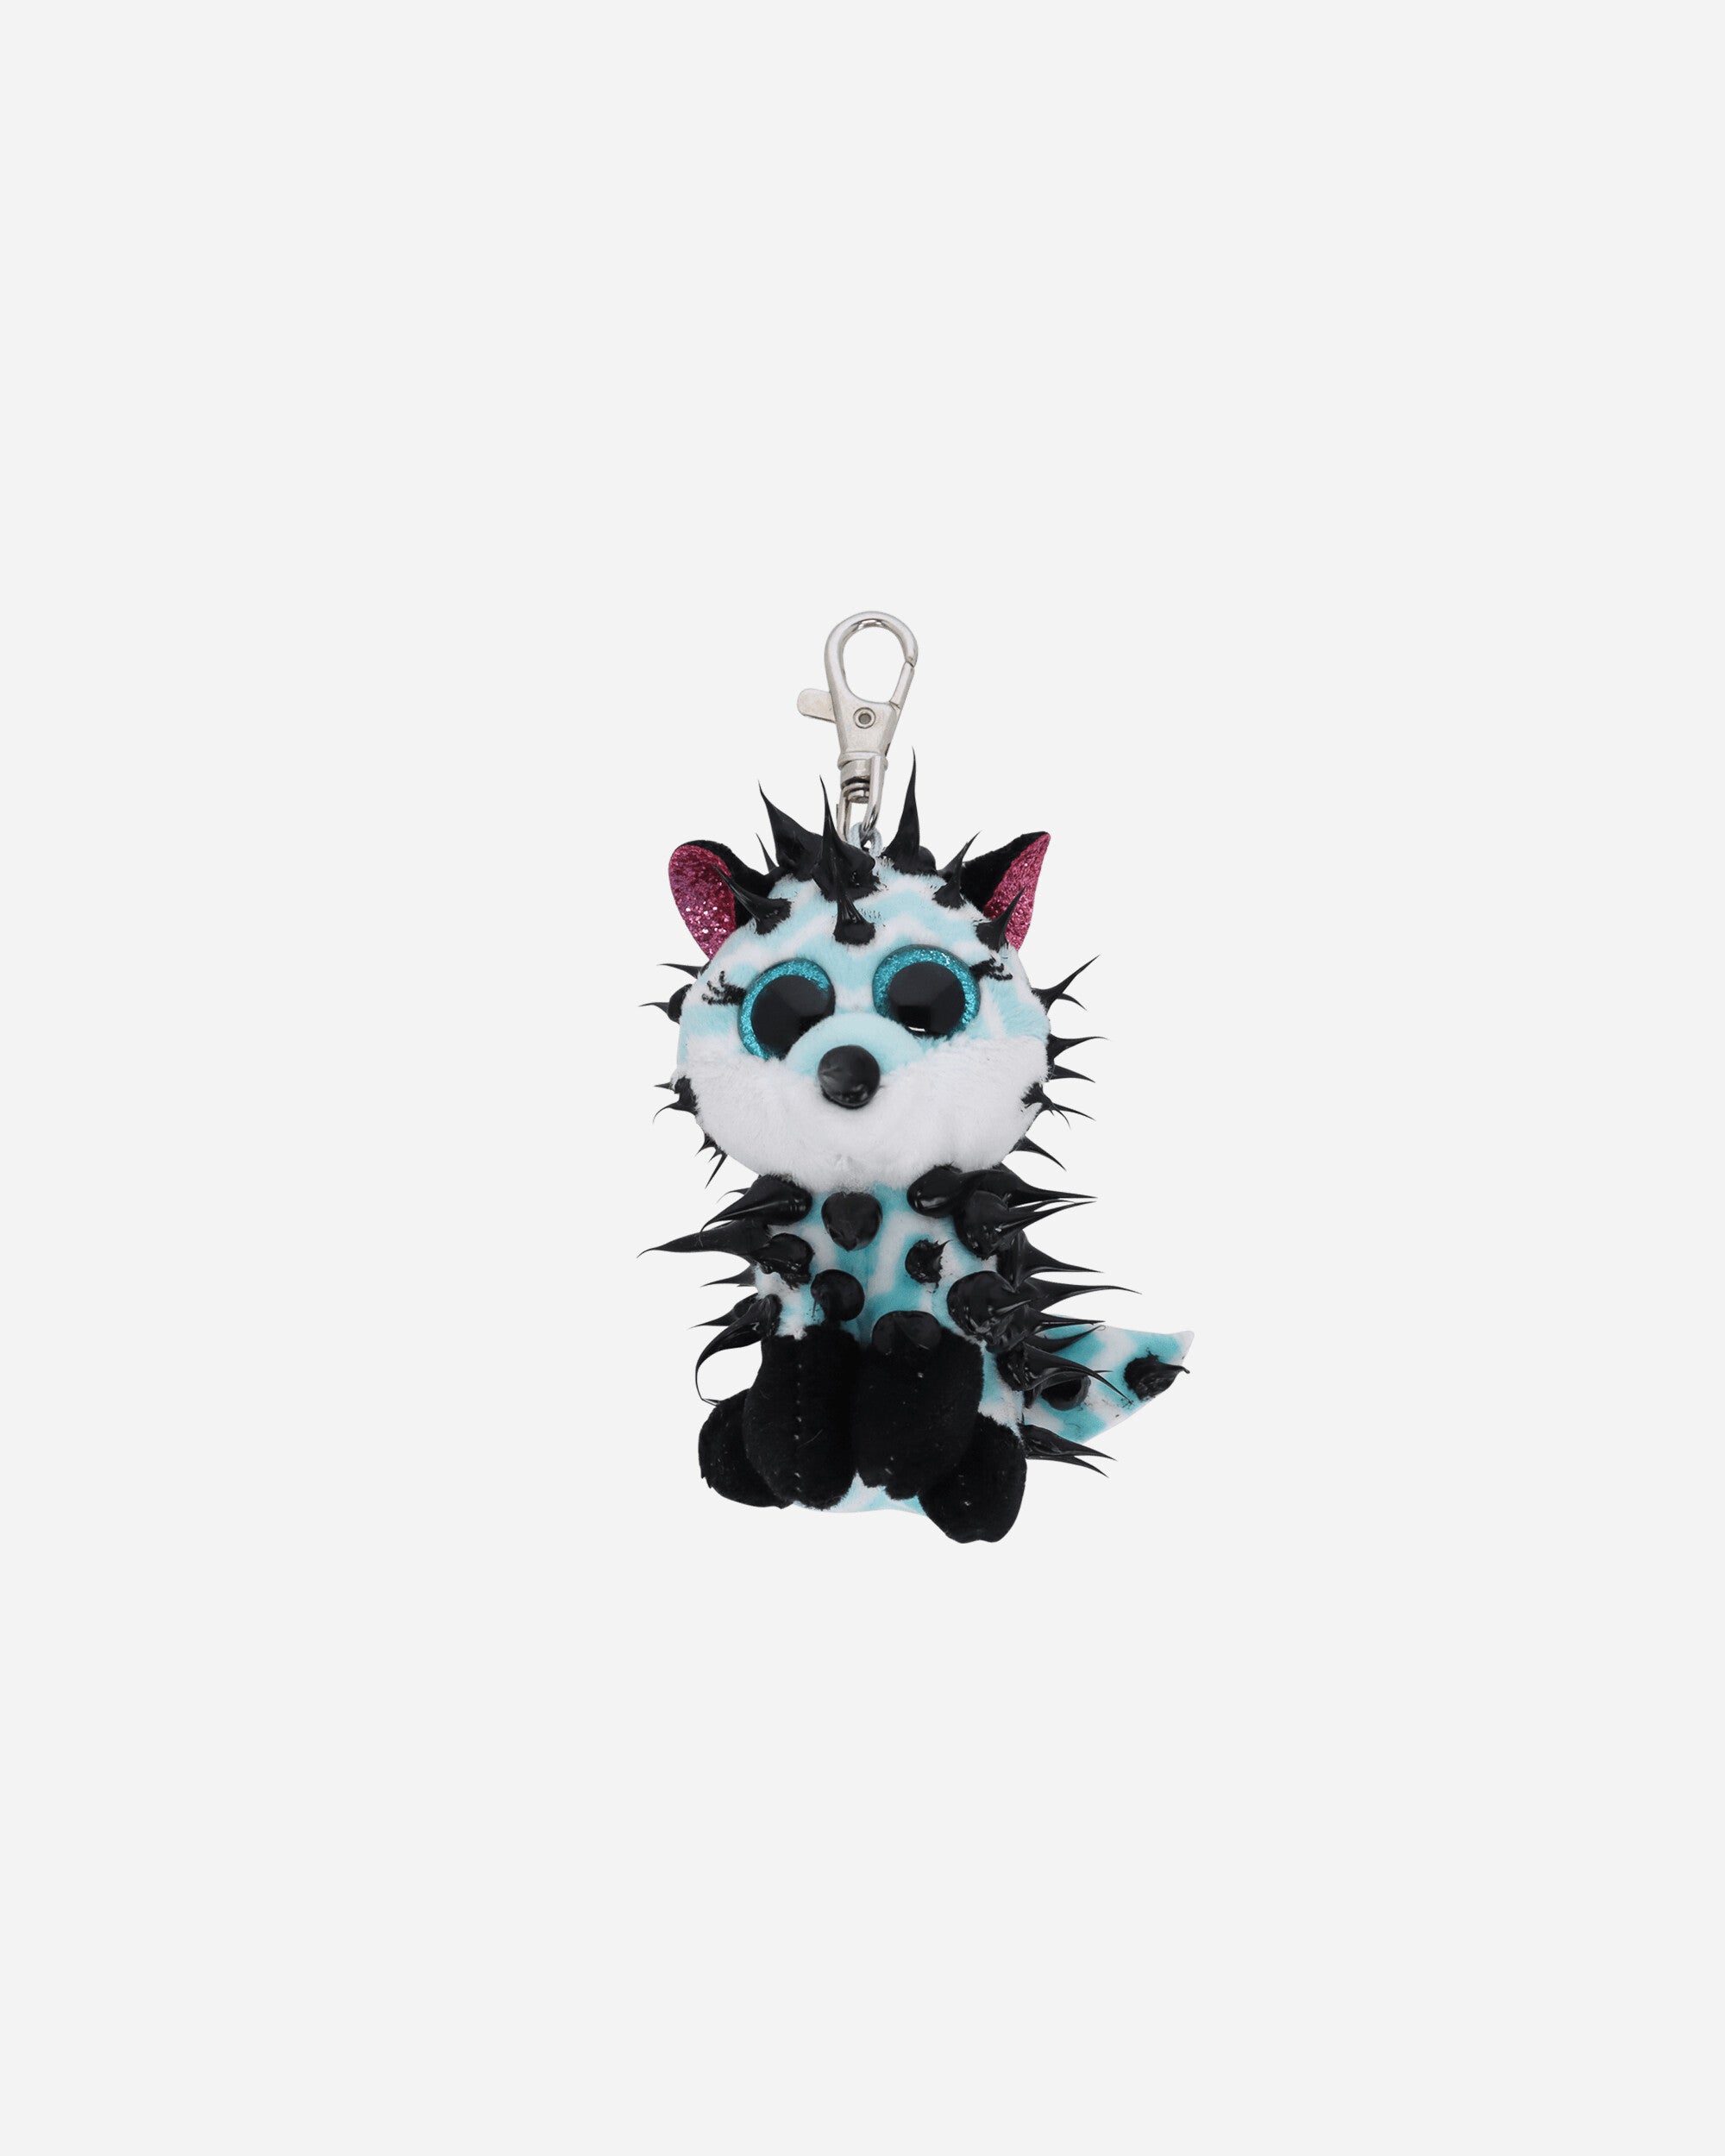 Prototypes Wmns Silicon Spiked Keychain Multicolour Black Spikes Small Accessories Keychains PT04AC05US 5